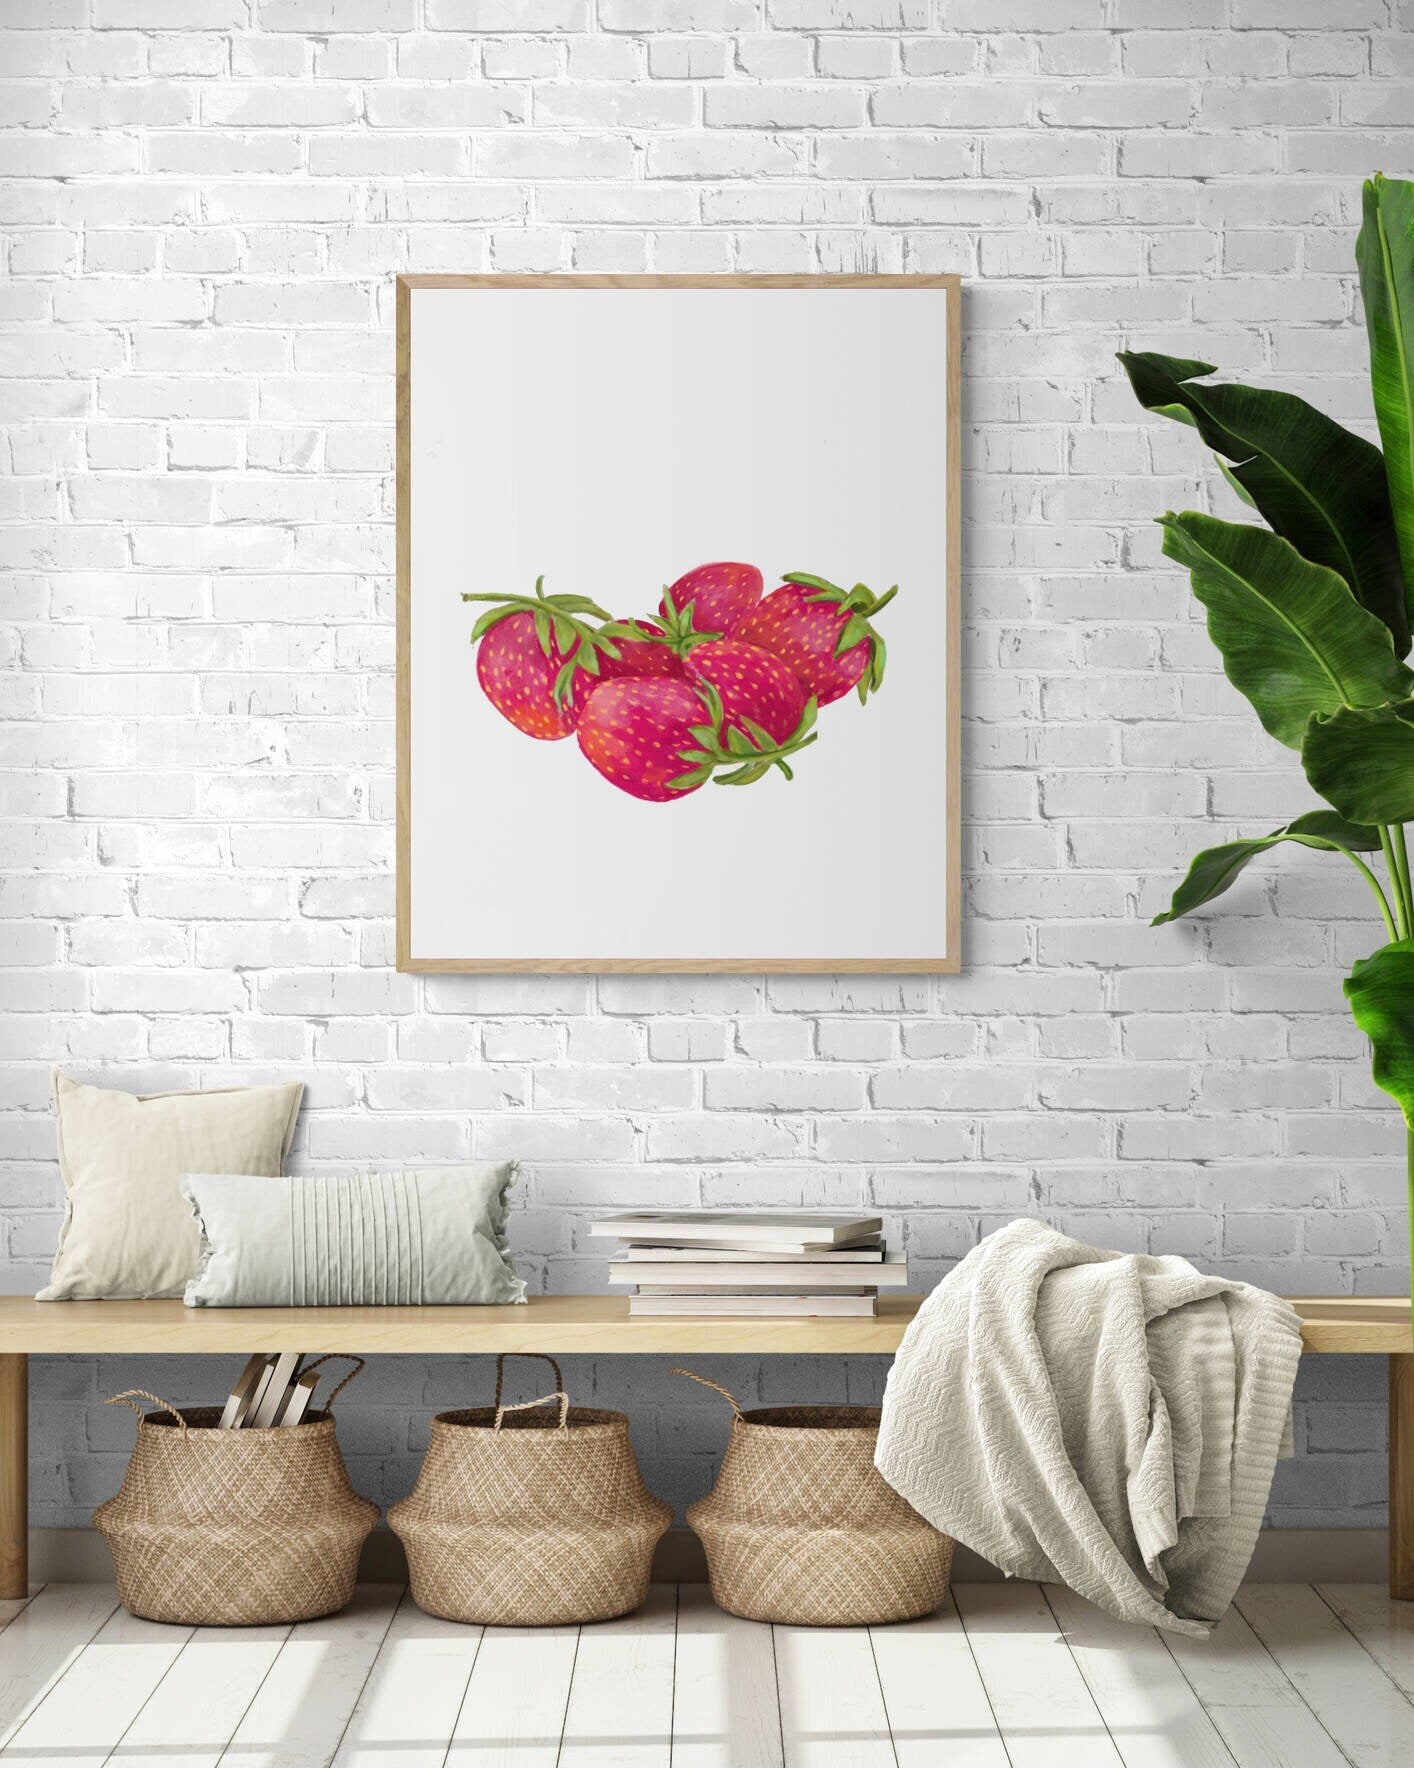 Strawberry Art Print, Strawberry Wall Art, Kitchen Wall Hanging, Dining Room Decor, Berry Painting, Fruit Illustration, Farmhouse Wall Decor